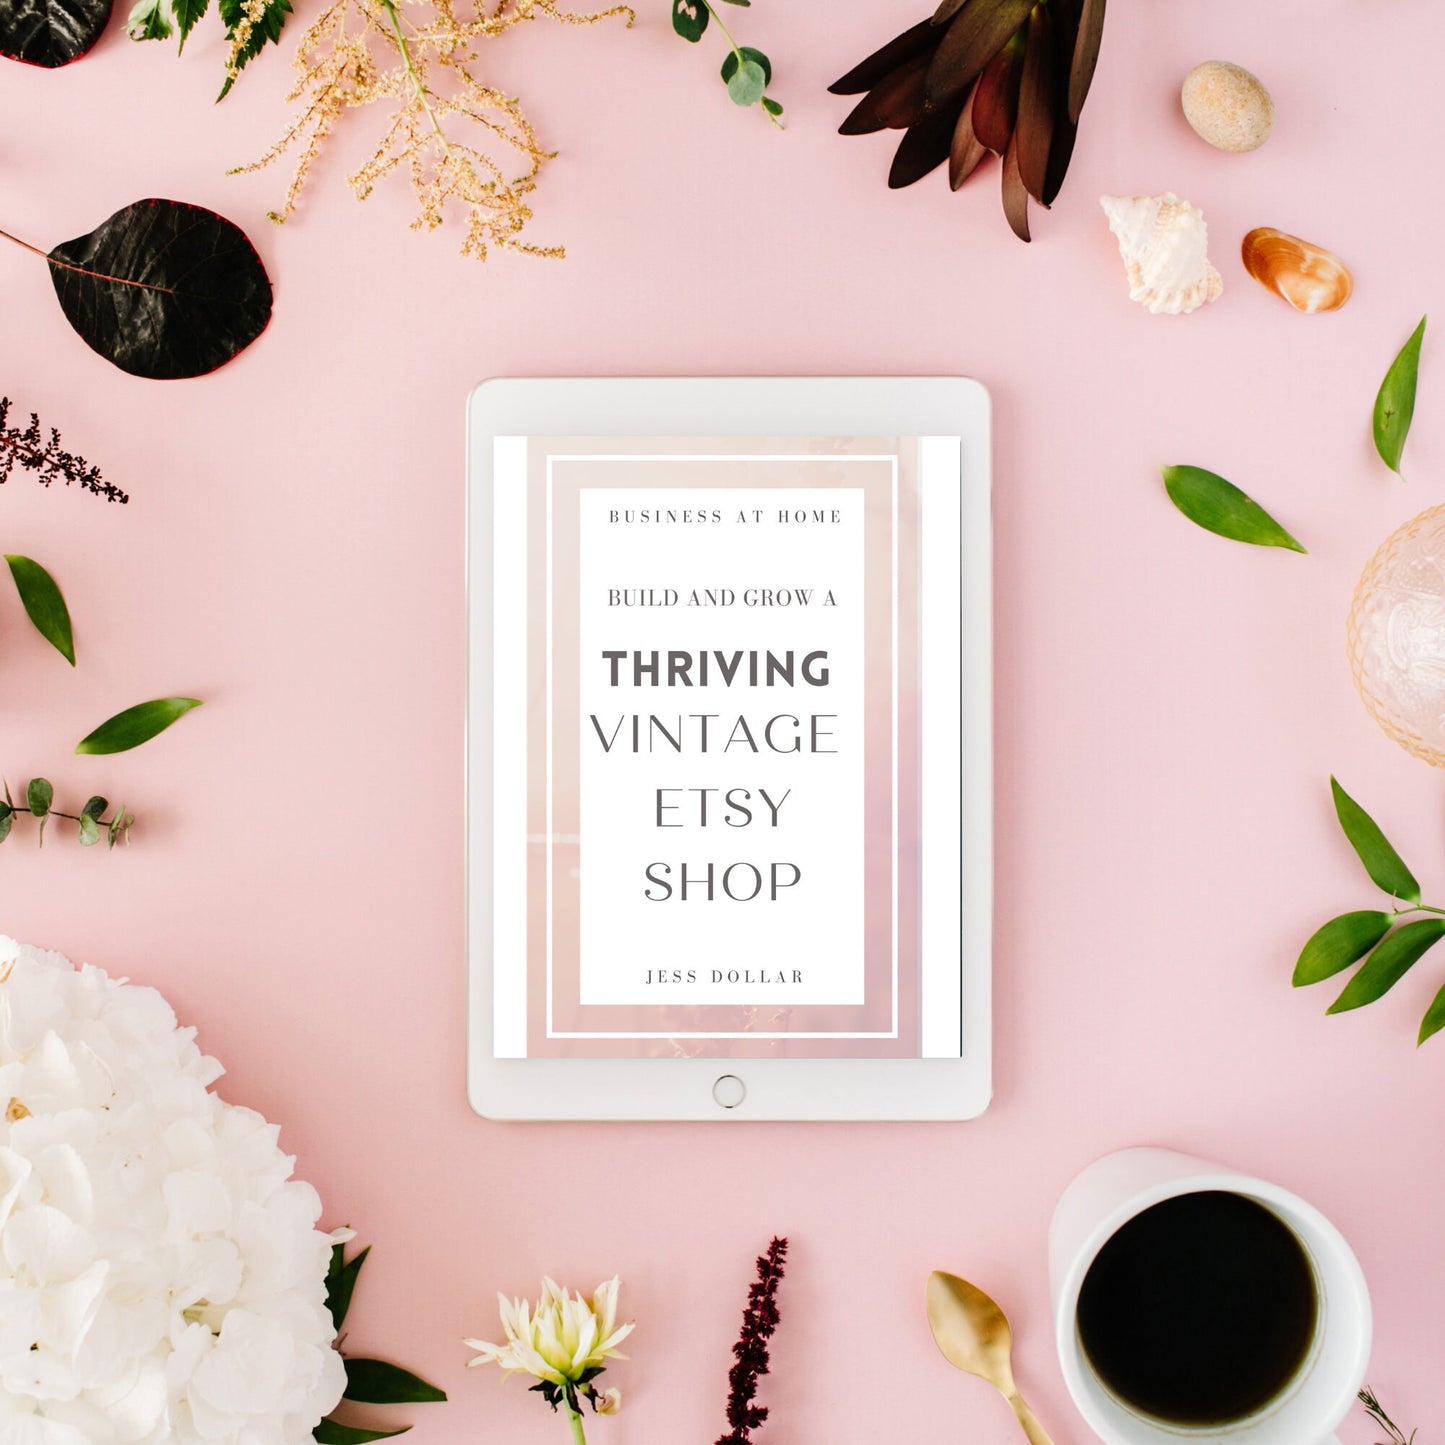 How To Build and Grow a Thriving Vintage Etsy Shop - 42 Page Ebook - Instant Download - How To Sell Vintage on Etsy